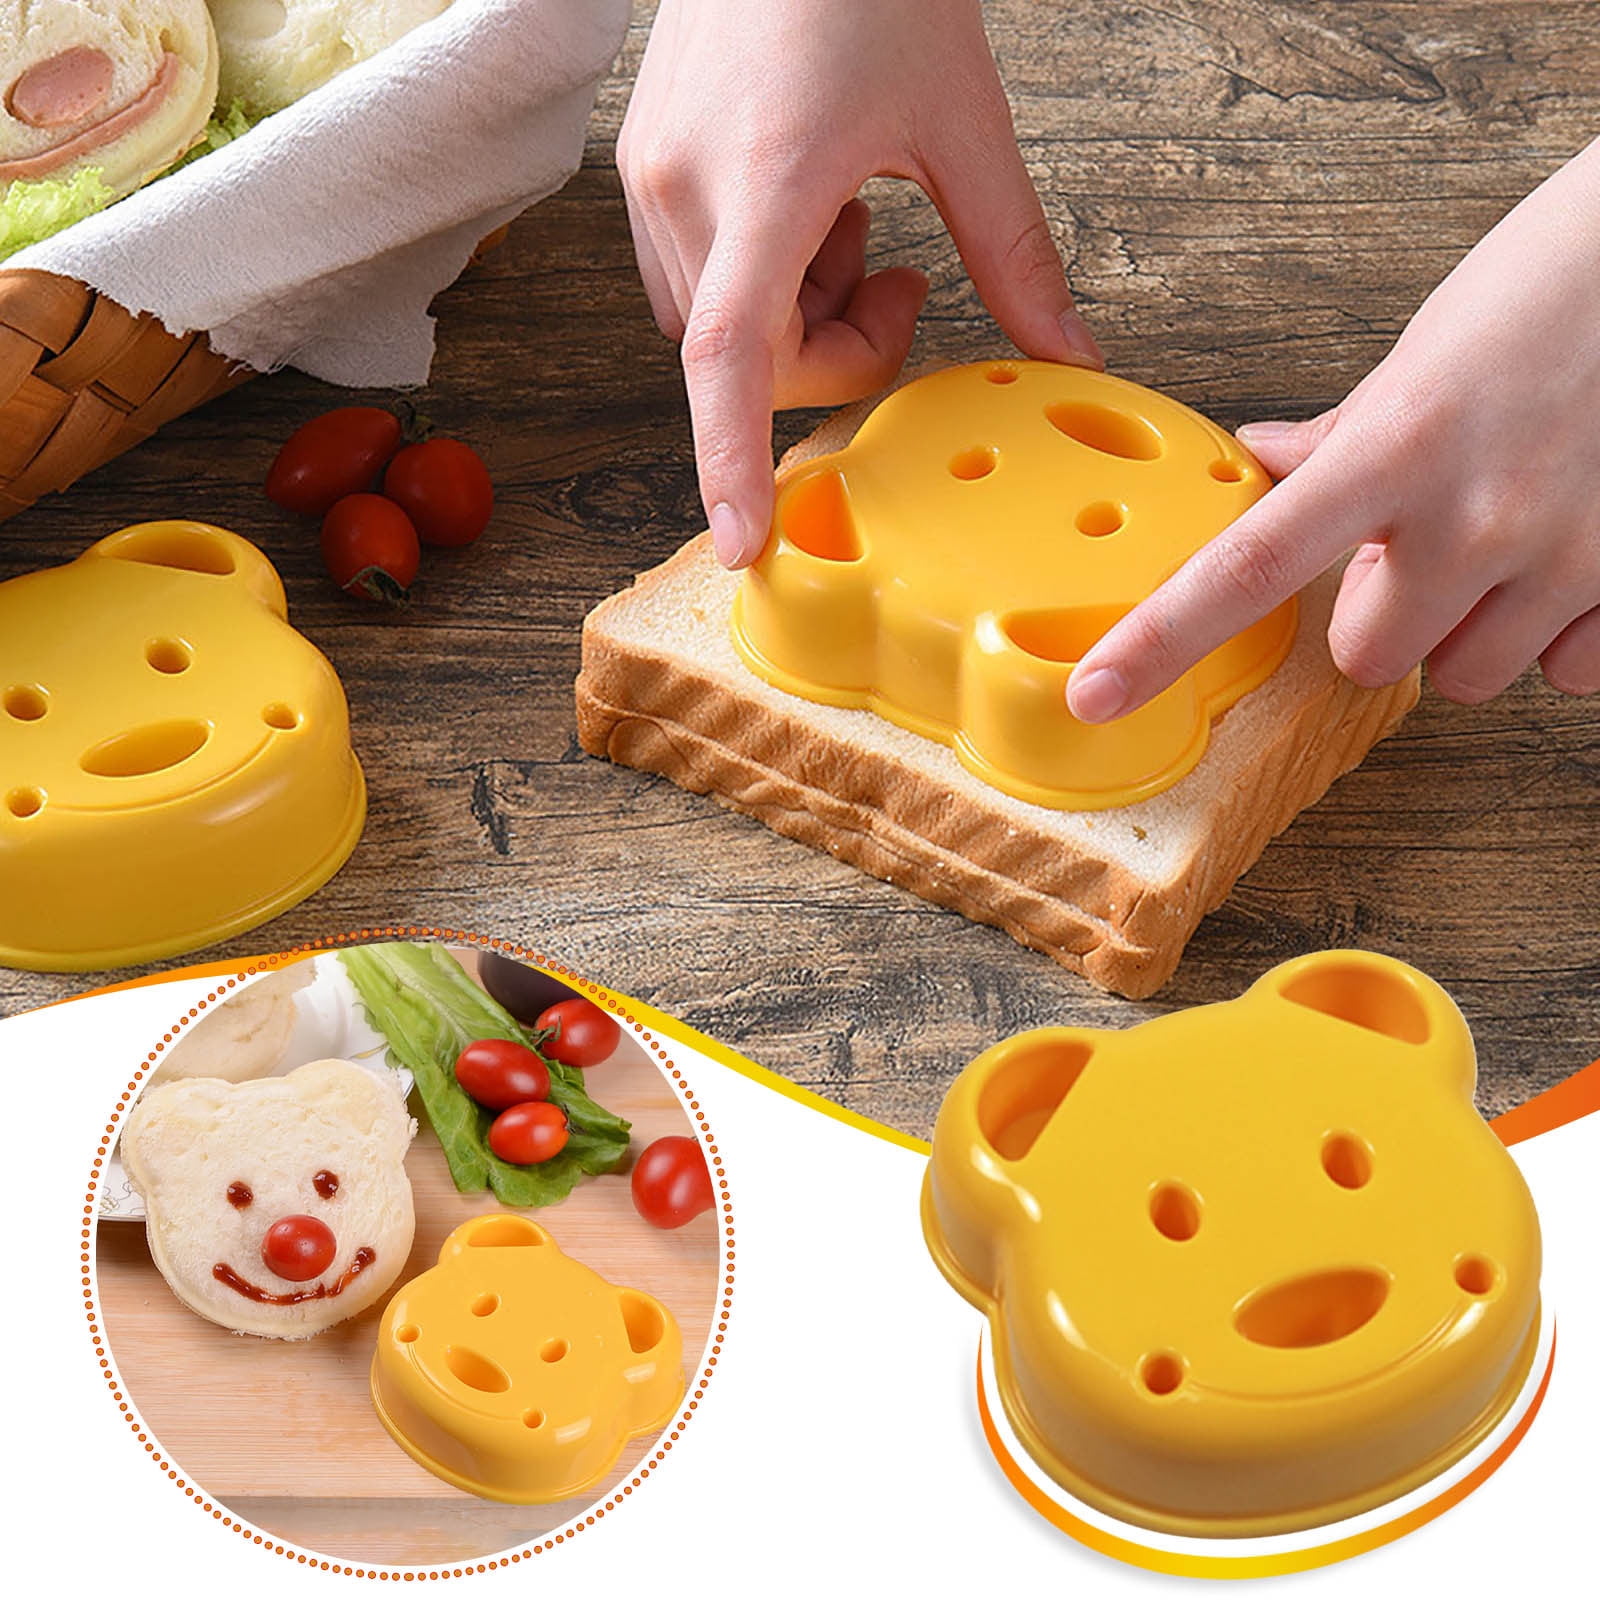 Kitchenique - TEDDY BEAR POCKET SANDWICH MAKER With the Teddy Bear Sandwich  Maker, you can shape your sandwich into an adorable bear shape! It allows  you to create sandwiches with those messy